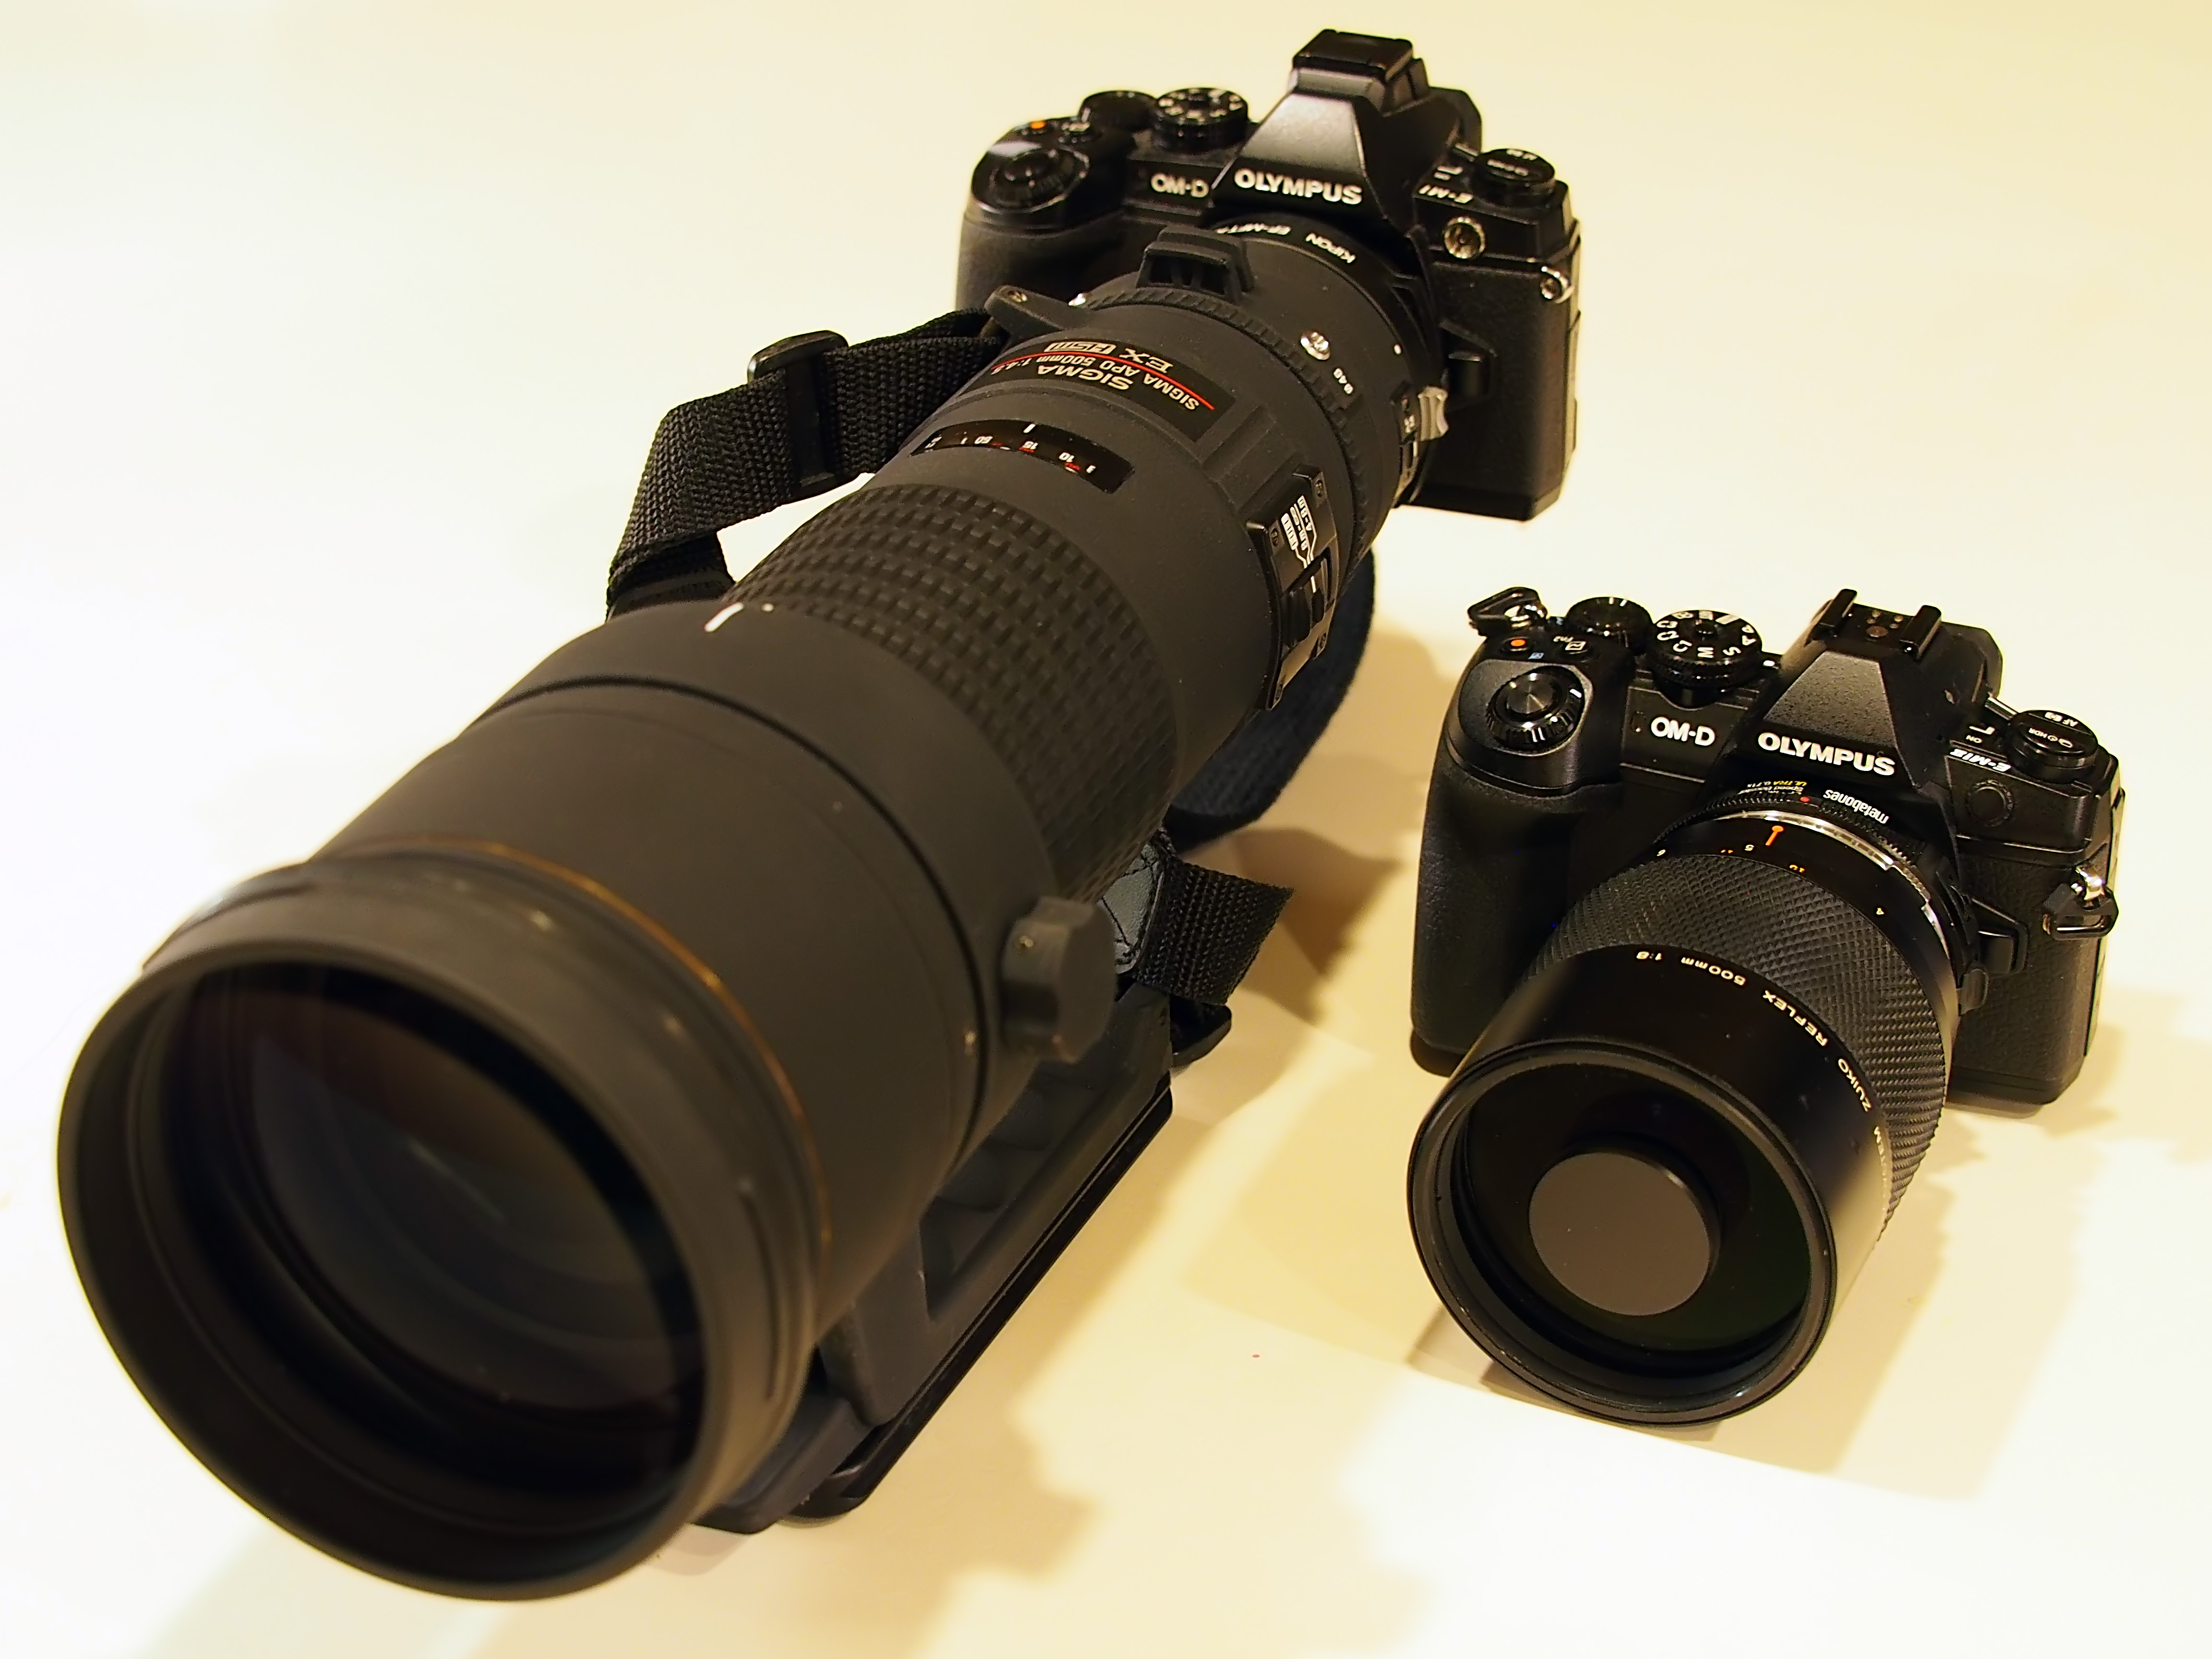 Telephoto Prime Shootout and the OM 500mm f/8 Reflex Lens – Jim